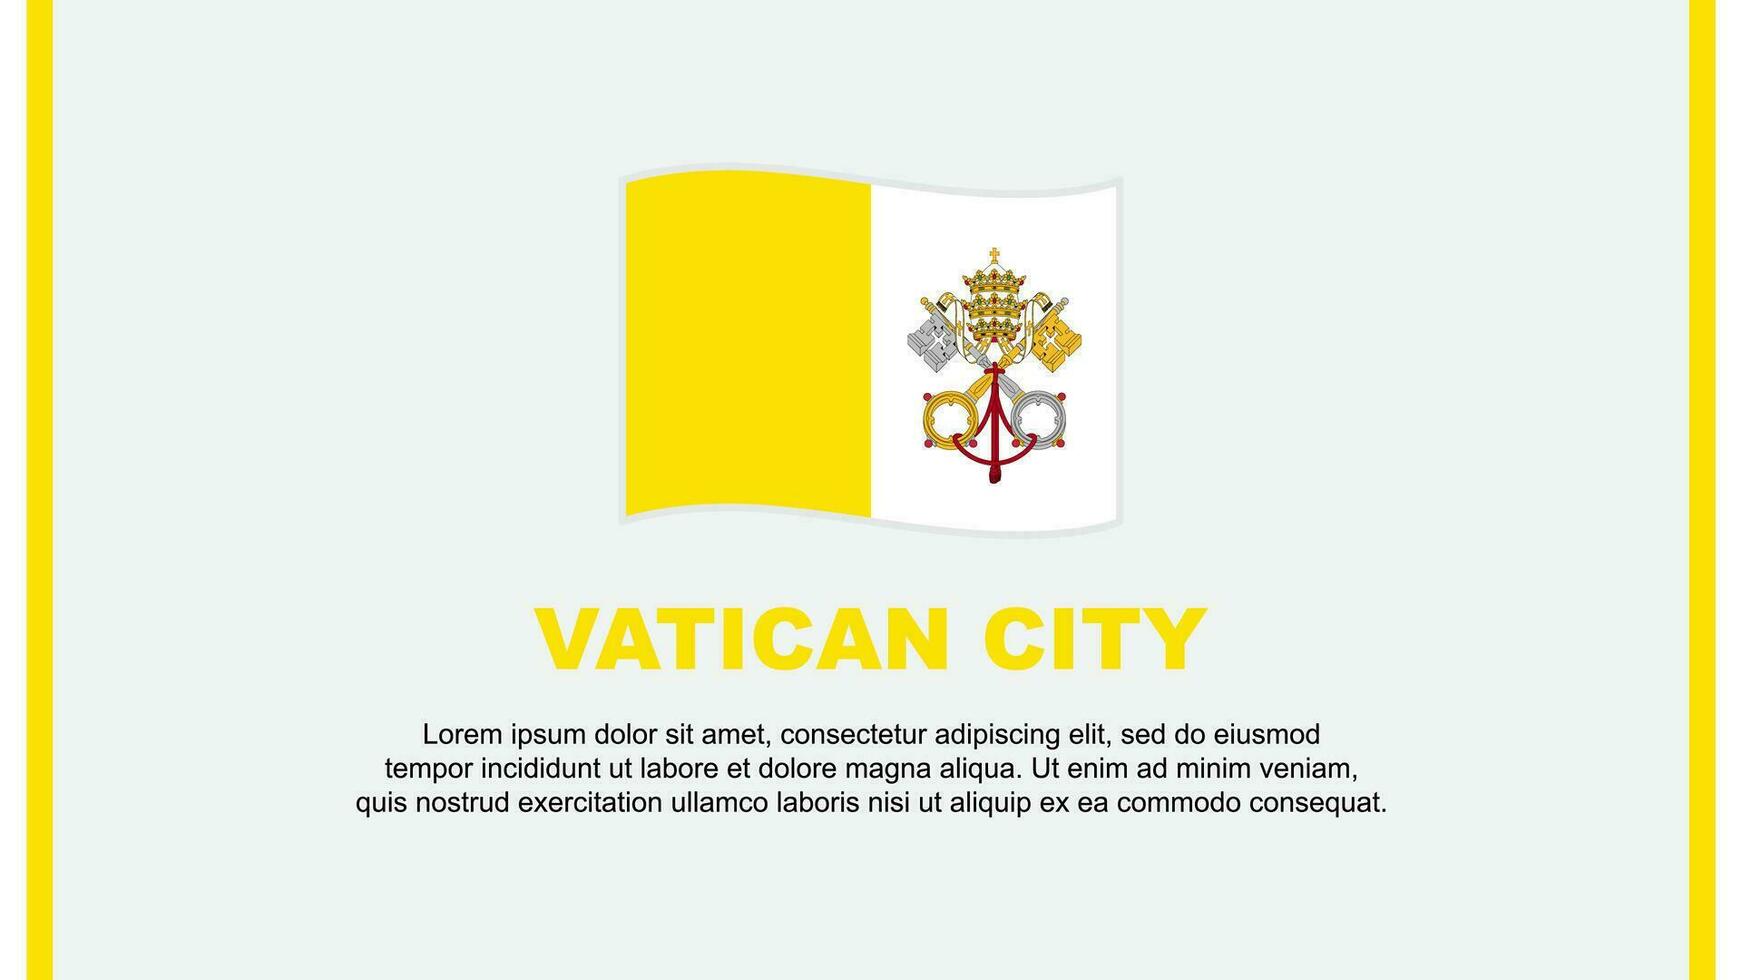 Vatican City Flag Abstract Background Design Template. Vatican City Independence Day Banner Social Media Vector Illustration. Vatican City Cartoon